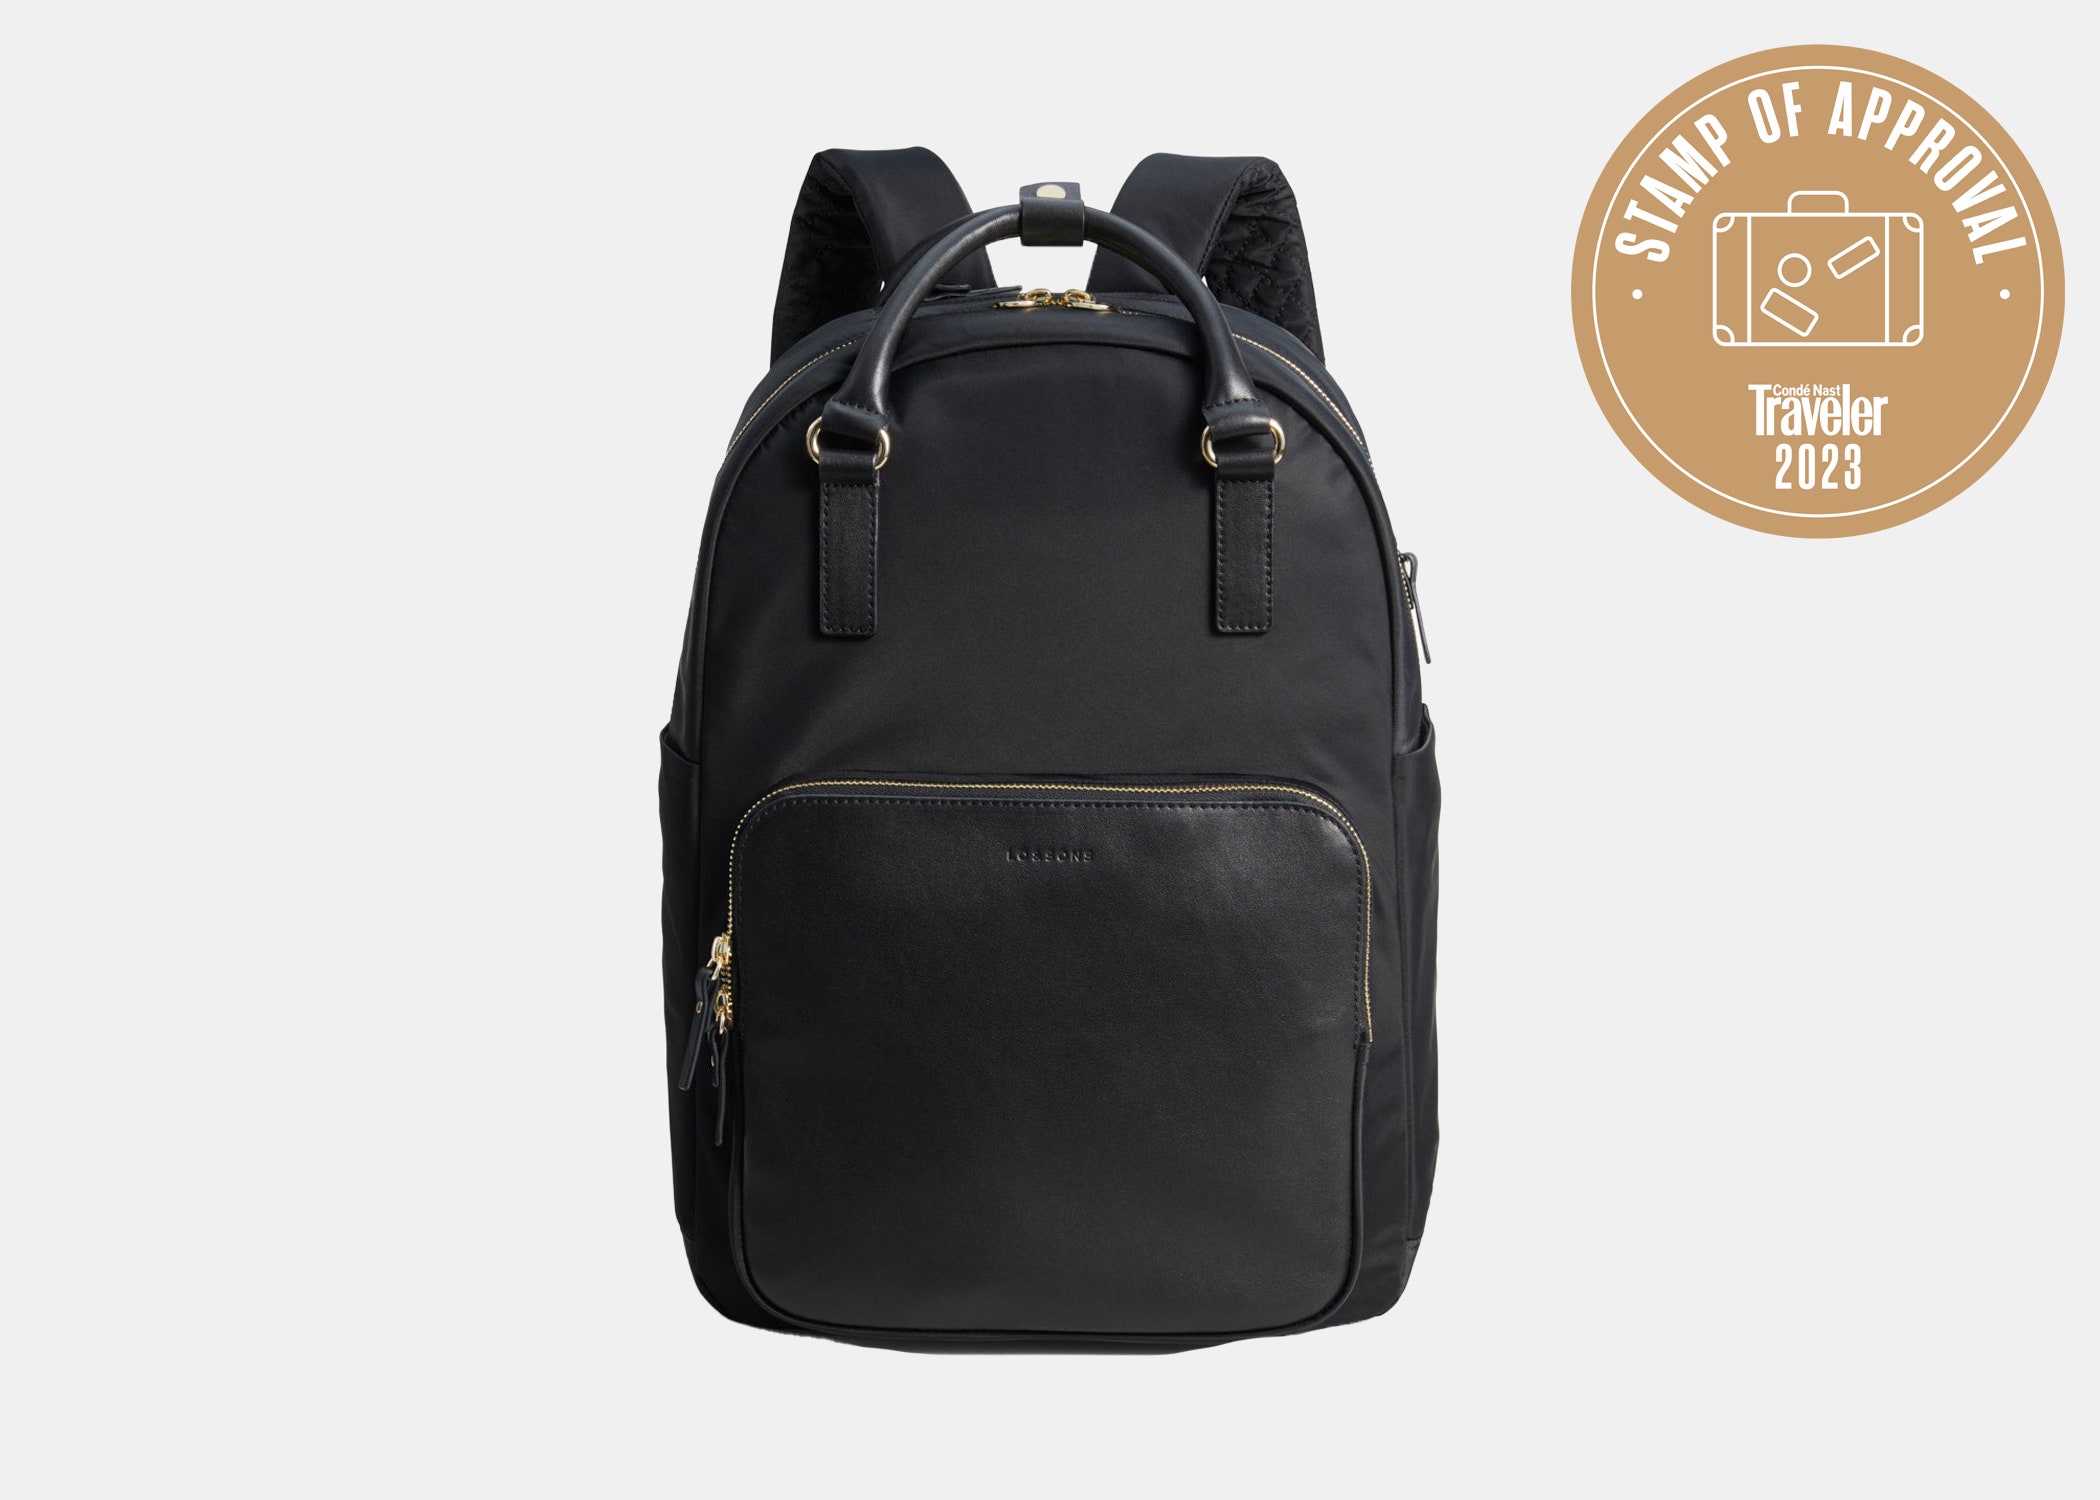 <p><em>Traveler</em> Contributor <a href="https://www.cntraveler.com/contributor/lydia-mansel?mbid=synd_msn_rss&utm_source=msn&utm_medium=syndication">Lydia Mansel</a> loves this sleek, convertible backpack for carrying all of her work essentials. It features a 13" laptop compartment and can easily transition into a tote, thanks to backpack straps that tuck into a back pocket. It has plenty of pockets for organization—including a hidden one at the top for slipping your passport and boarding pass into while at the airport—and a trolley sleeve. It's made of a mix of nylon and leather, and has memory foam straps for extra comfort.</p> <p><strong>Pros:</strong> It can carry two laptops, plenty of pockets, luggage sleeve<br> <strong>Cons:</strong> Offered in two sizes, but the smaller version is a little too small to store a day's worth of essentials</p> <p><em><strong>Read a full review of this backpack <a href="https://www.cntraveler.com/story/lo-and-sons-the-rowledge-backpack-review?mbid=synd_msn_rss&utm_source=msn&utm_medium=syndication">here</a>.</strong></em></p> $465, Lo & Sons. <a href="https://www.loandsons.com/products/rowledge-nylon-black-gold-grey">Get it now!</a><p>Sign up to receive the latest news, expert tips, and inspiration on all things travel</p><a href="https://www.cntraveler.com/newsletter/the-daily?sourceCode=msnsend">Inspire Me</a>